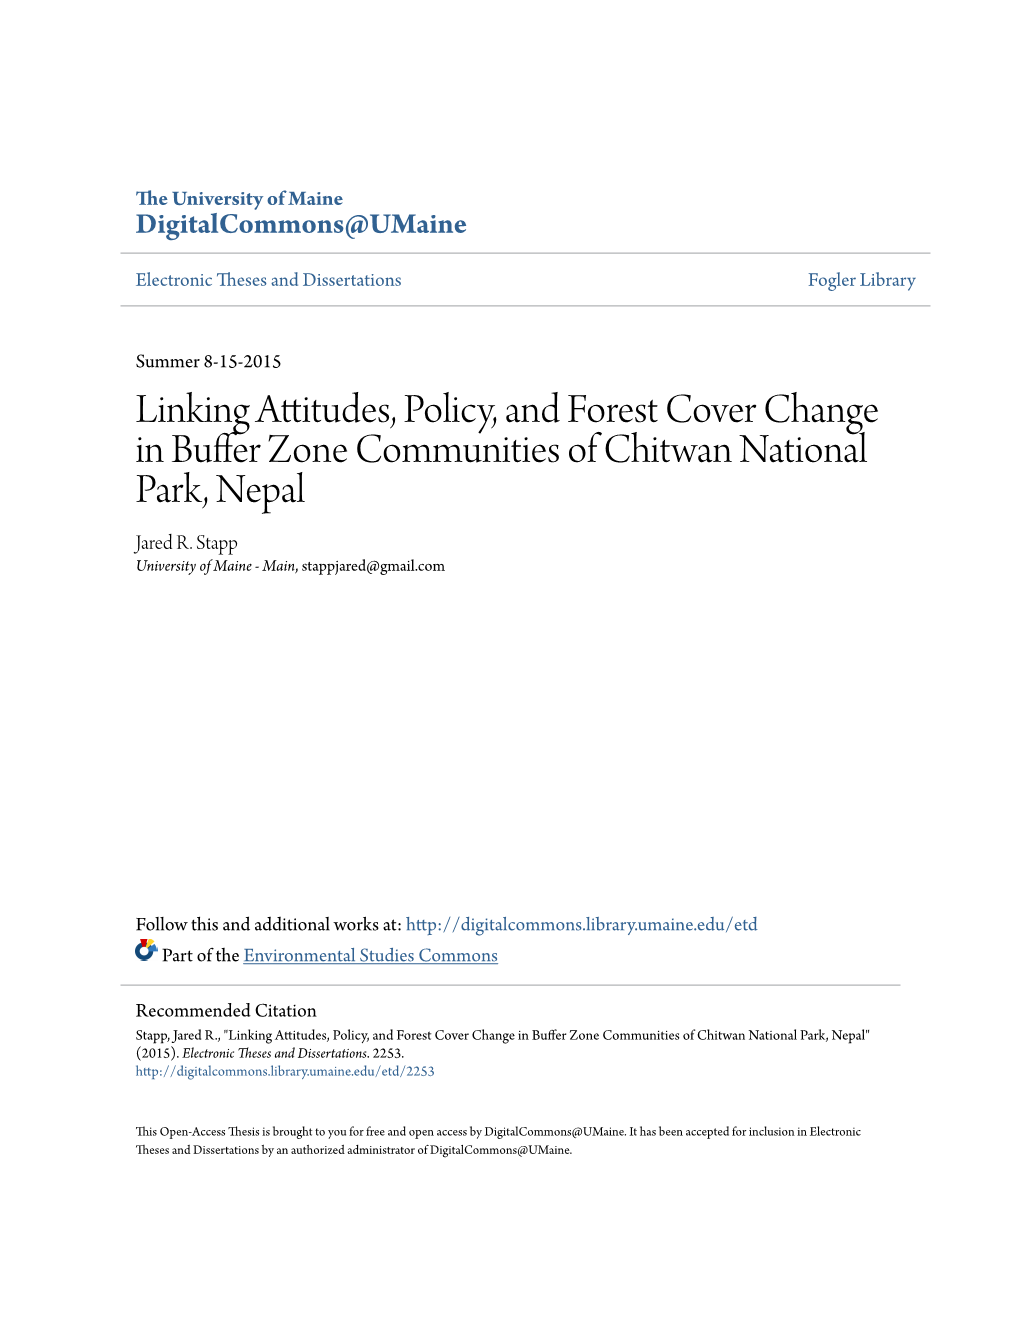 Linking Attitudes, Policy, and Forest Cover Change in Buffer Zone Communities of Chitwan National Park, Nepal Jared R